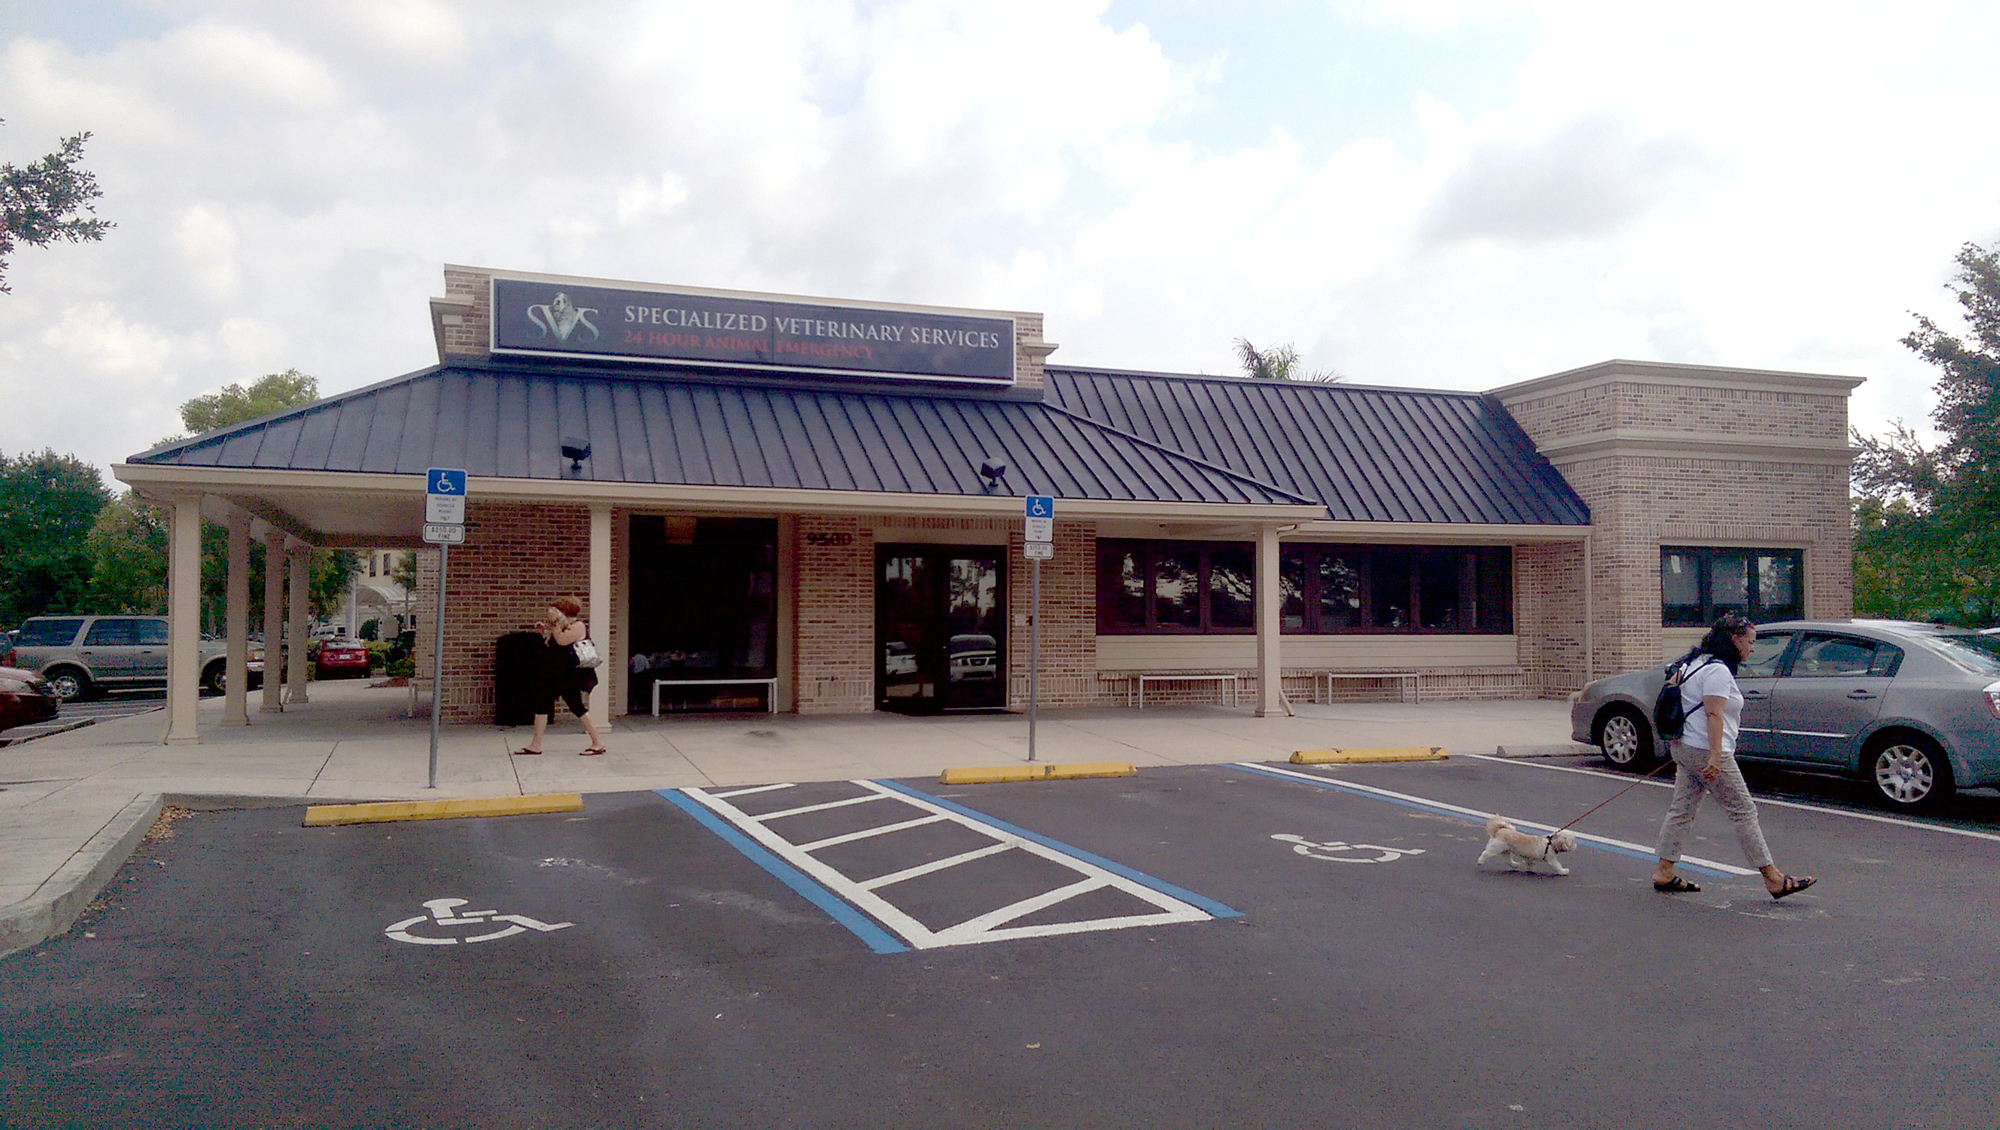 Specialized Veterinary Services prior to the renovation. Courtesy Stevens Construction.